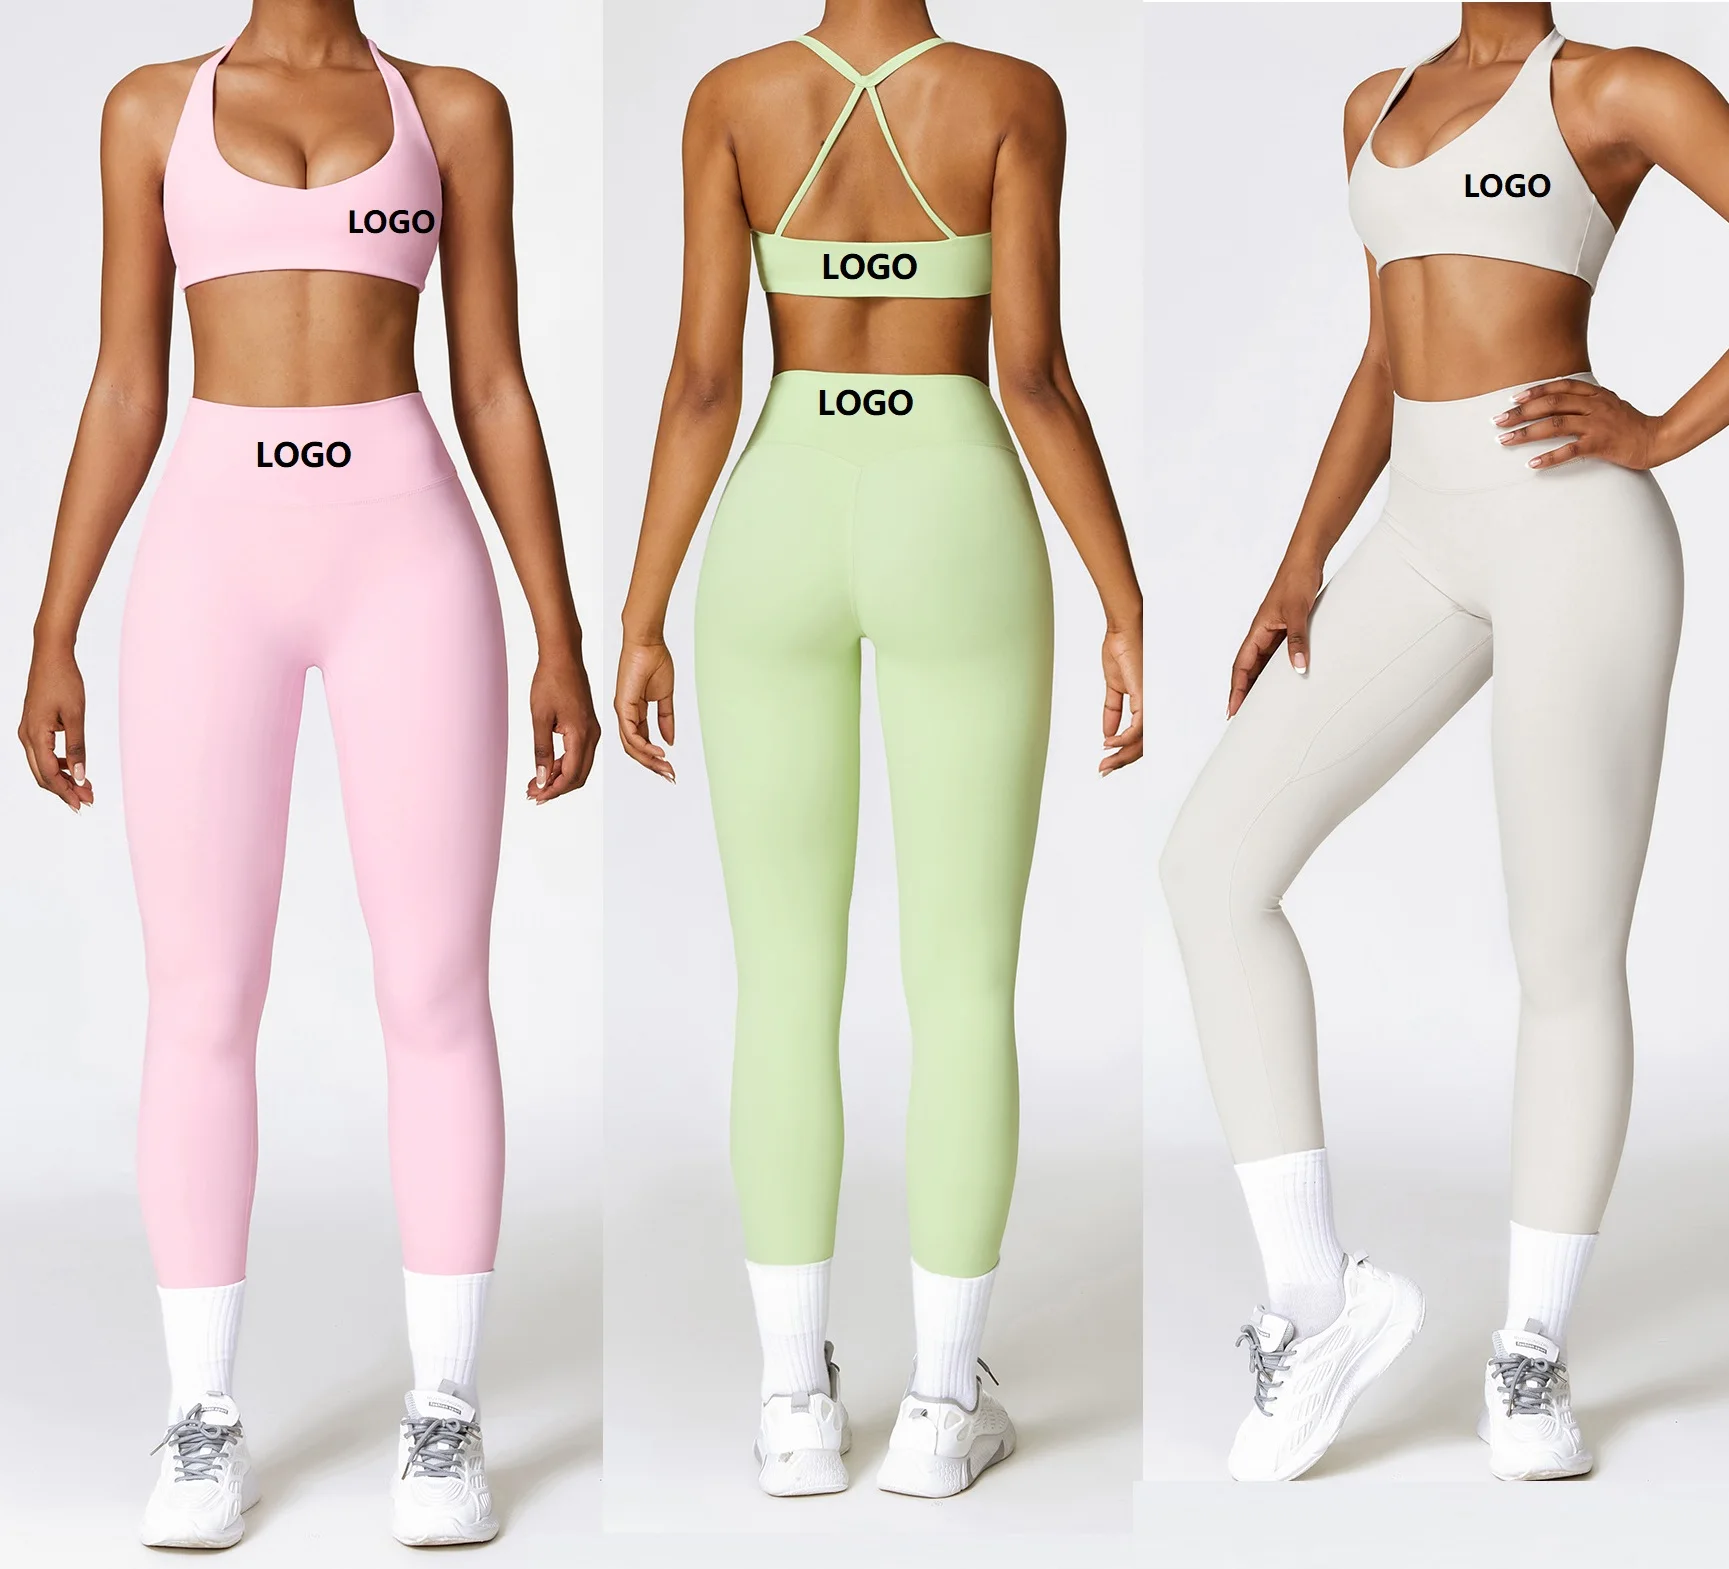 Fitness Clothings Yoga Wear Set Women Sportswear 2 Two Pieces Yoga Suit Custom logo Outfits Gym Fitness Sets